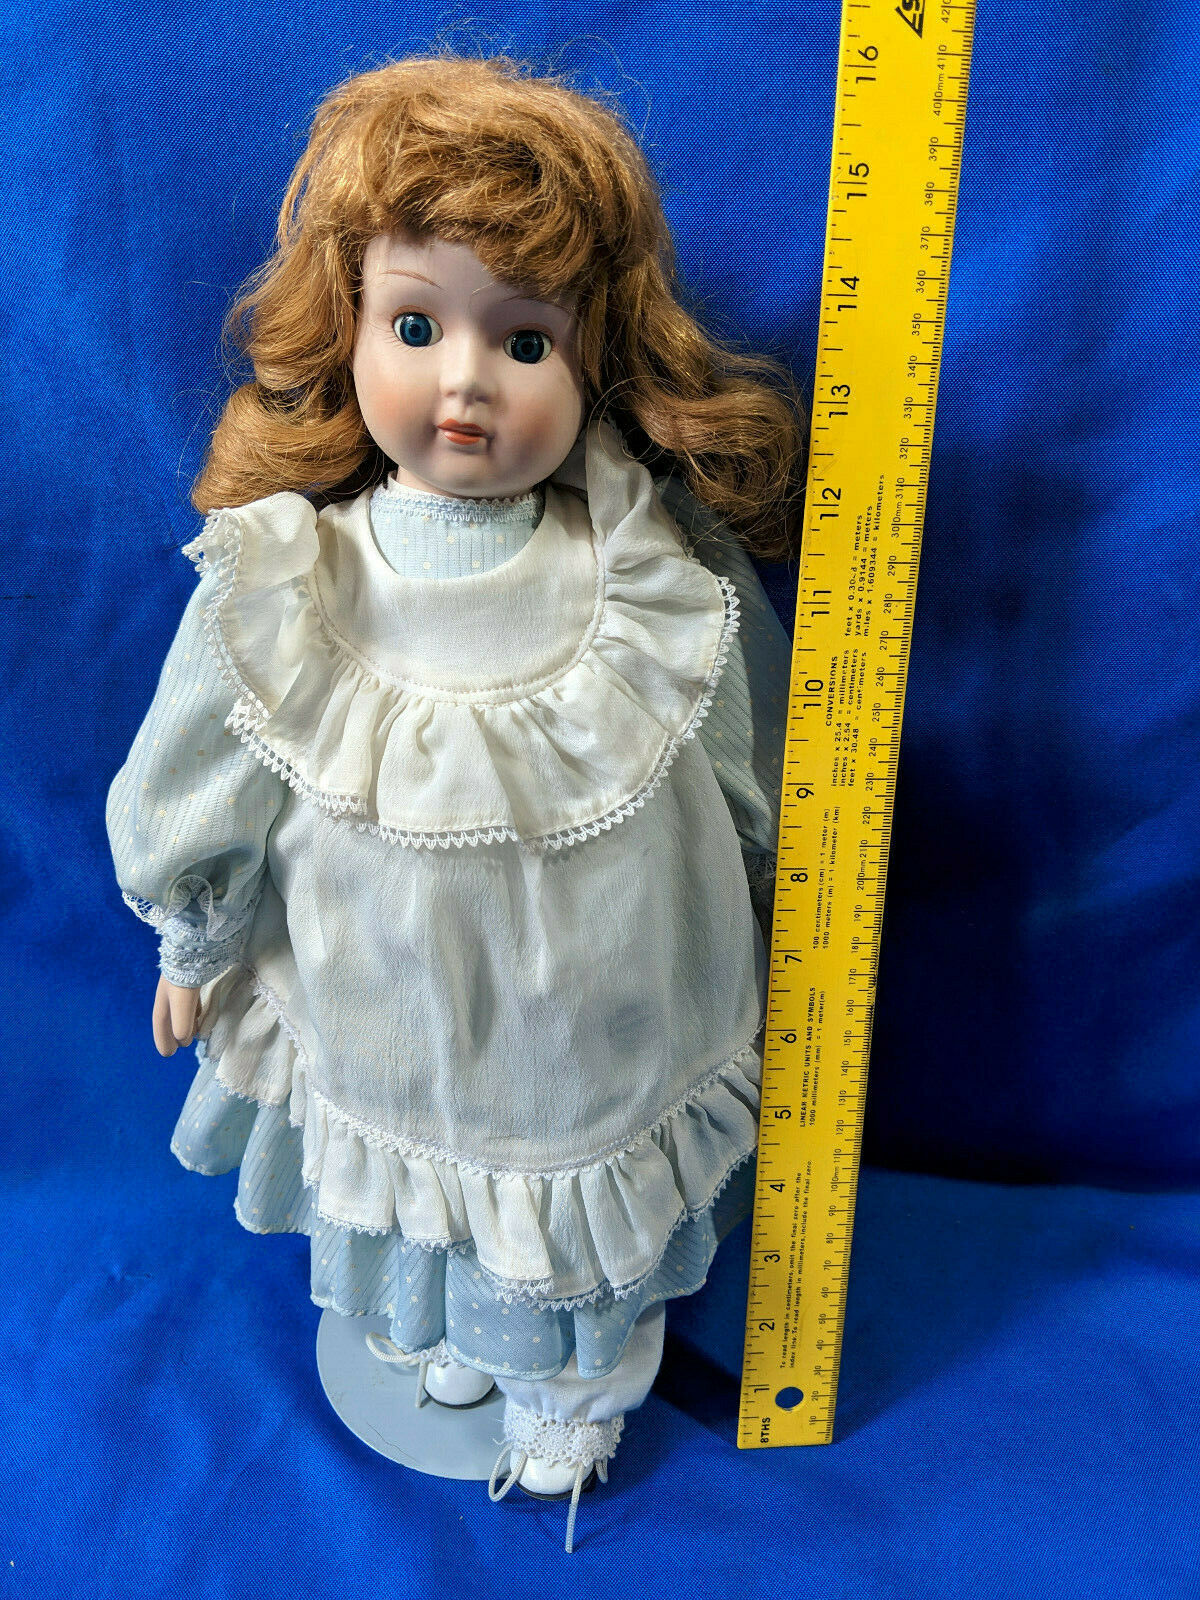 15" Beautiful Bisque Porcelain Doll Vintage Antique-style Curly Hair Clothing